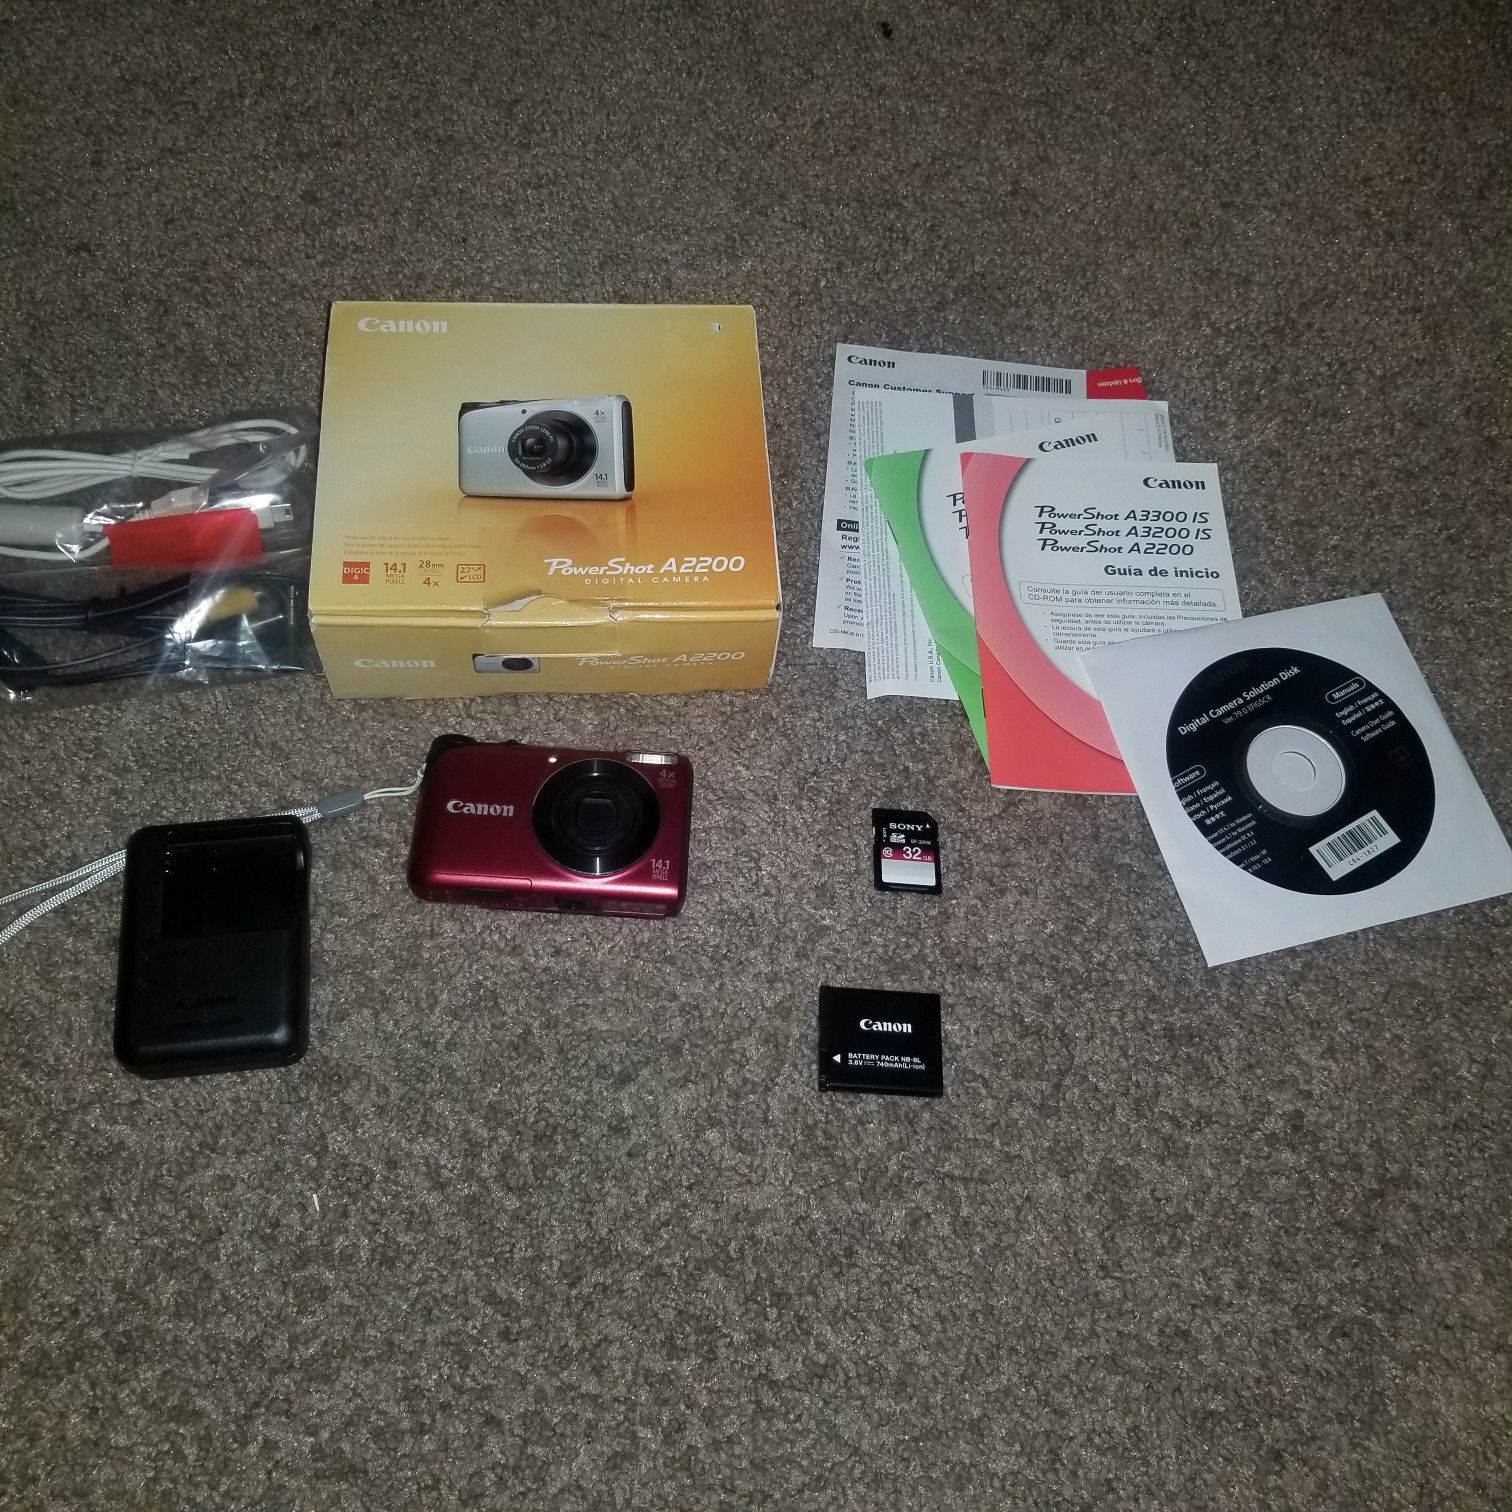 Canon PowerShot A2200 14.1 MP Digital Camera - Red - Bundle. Condition is Used. With charger/ battery, box manuals and cables and a